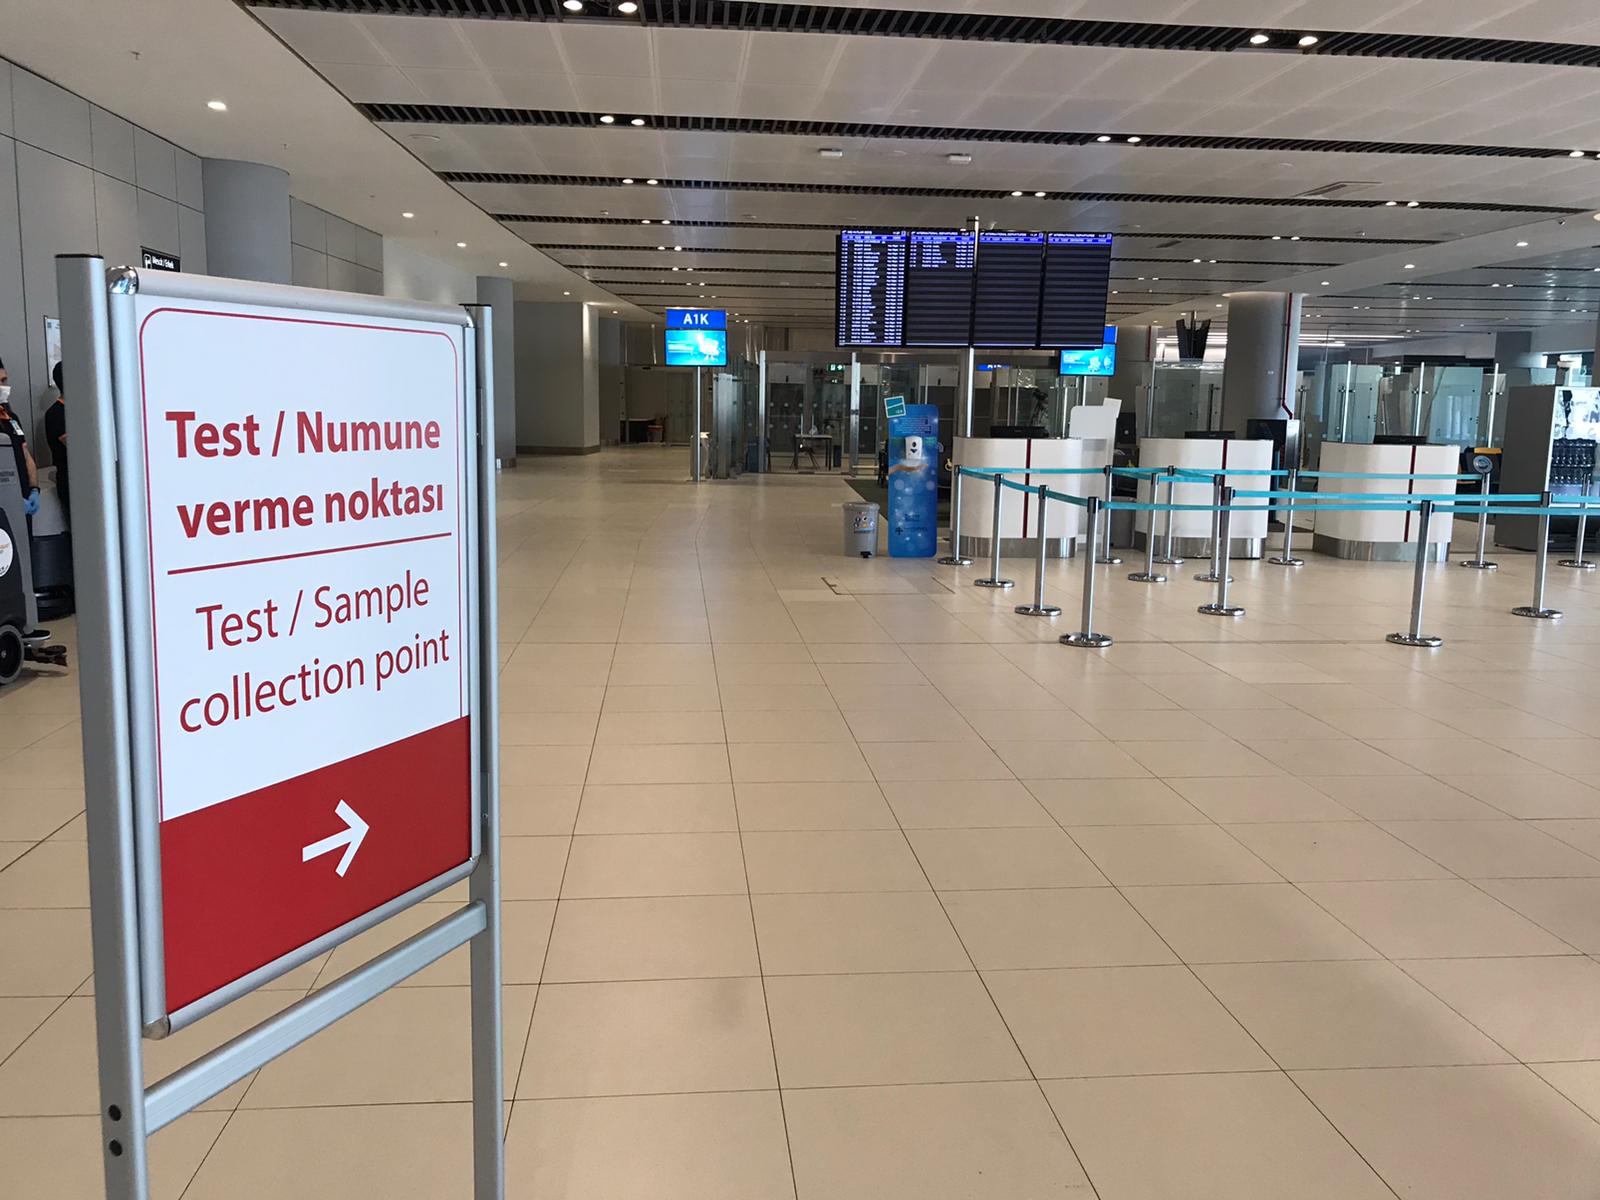 İstanbul Airport sets up Covid-19 test center